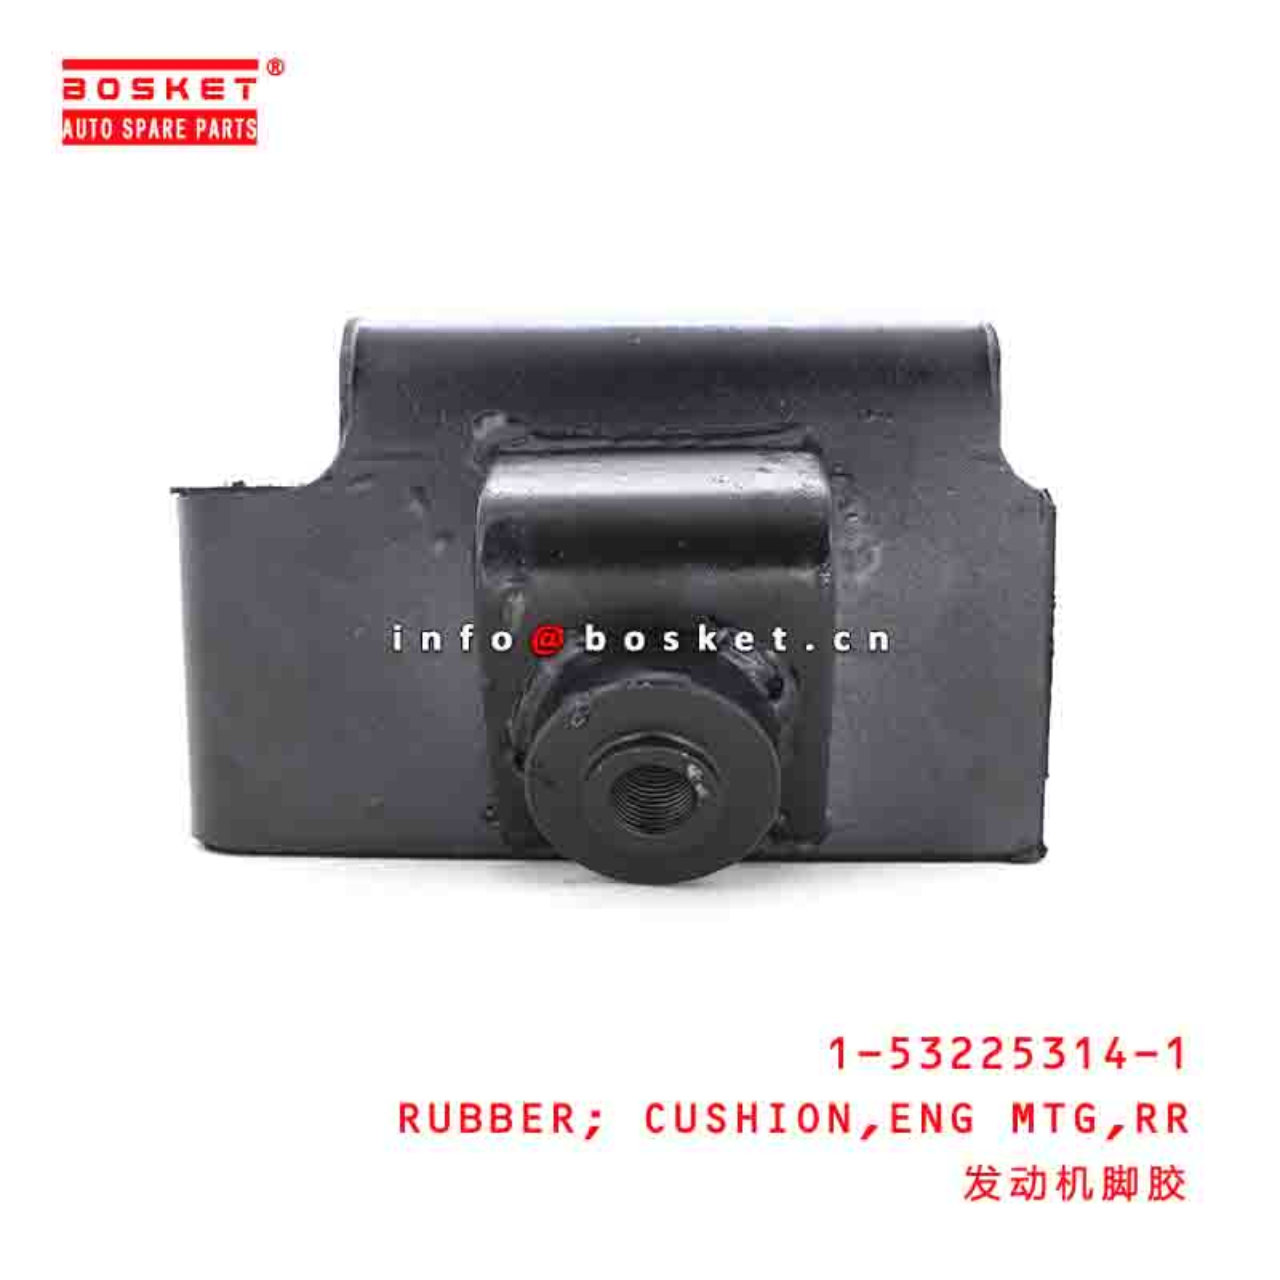 1-53225313-1 1532253131 REAR ENGINE MOUNTING CUSHION RUBBER RH Suitable FOR ISUZU LT132 6HE1